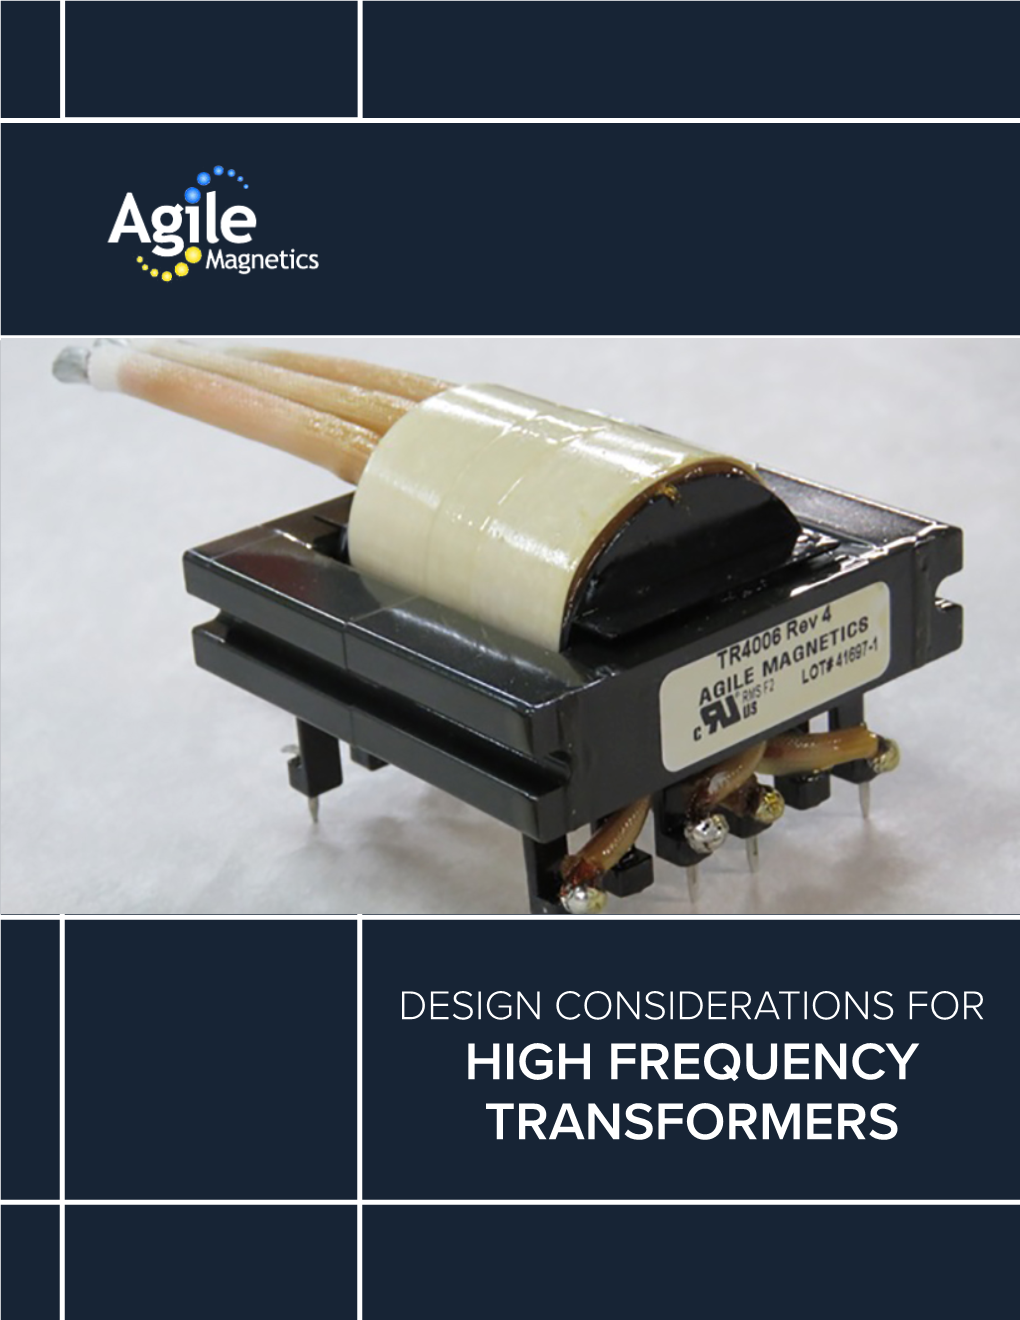 High Frequency Transformers Design Considerations for High Frequency Transformers | 2